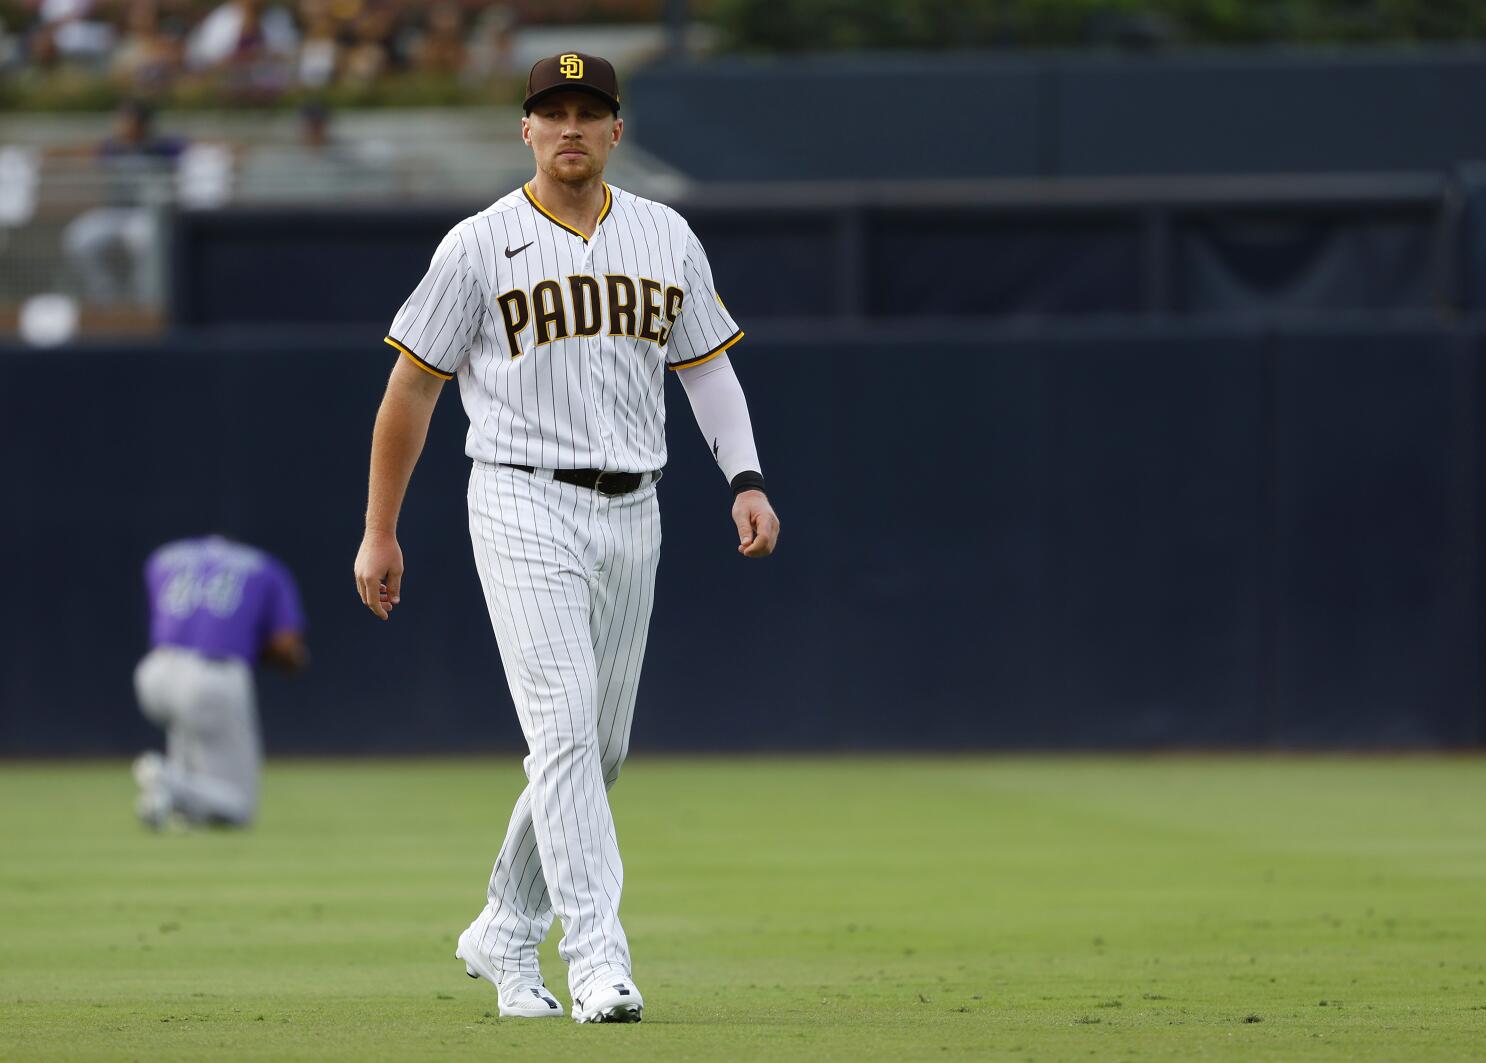 Padres notes: Rule change talk, Drury progress, roster moves - The